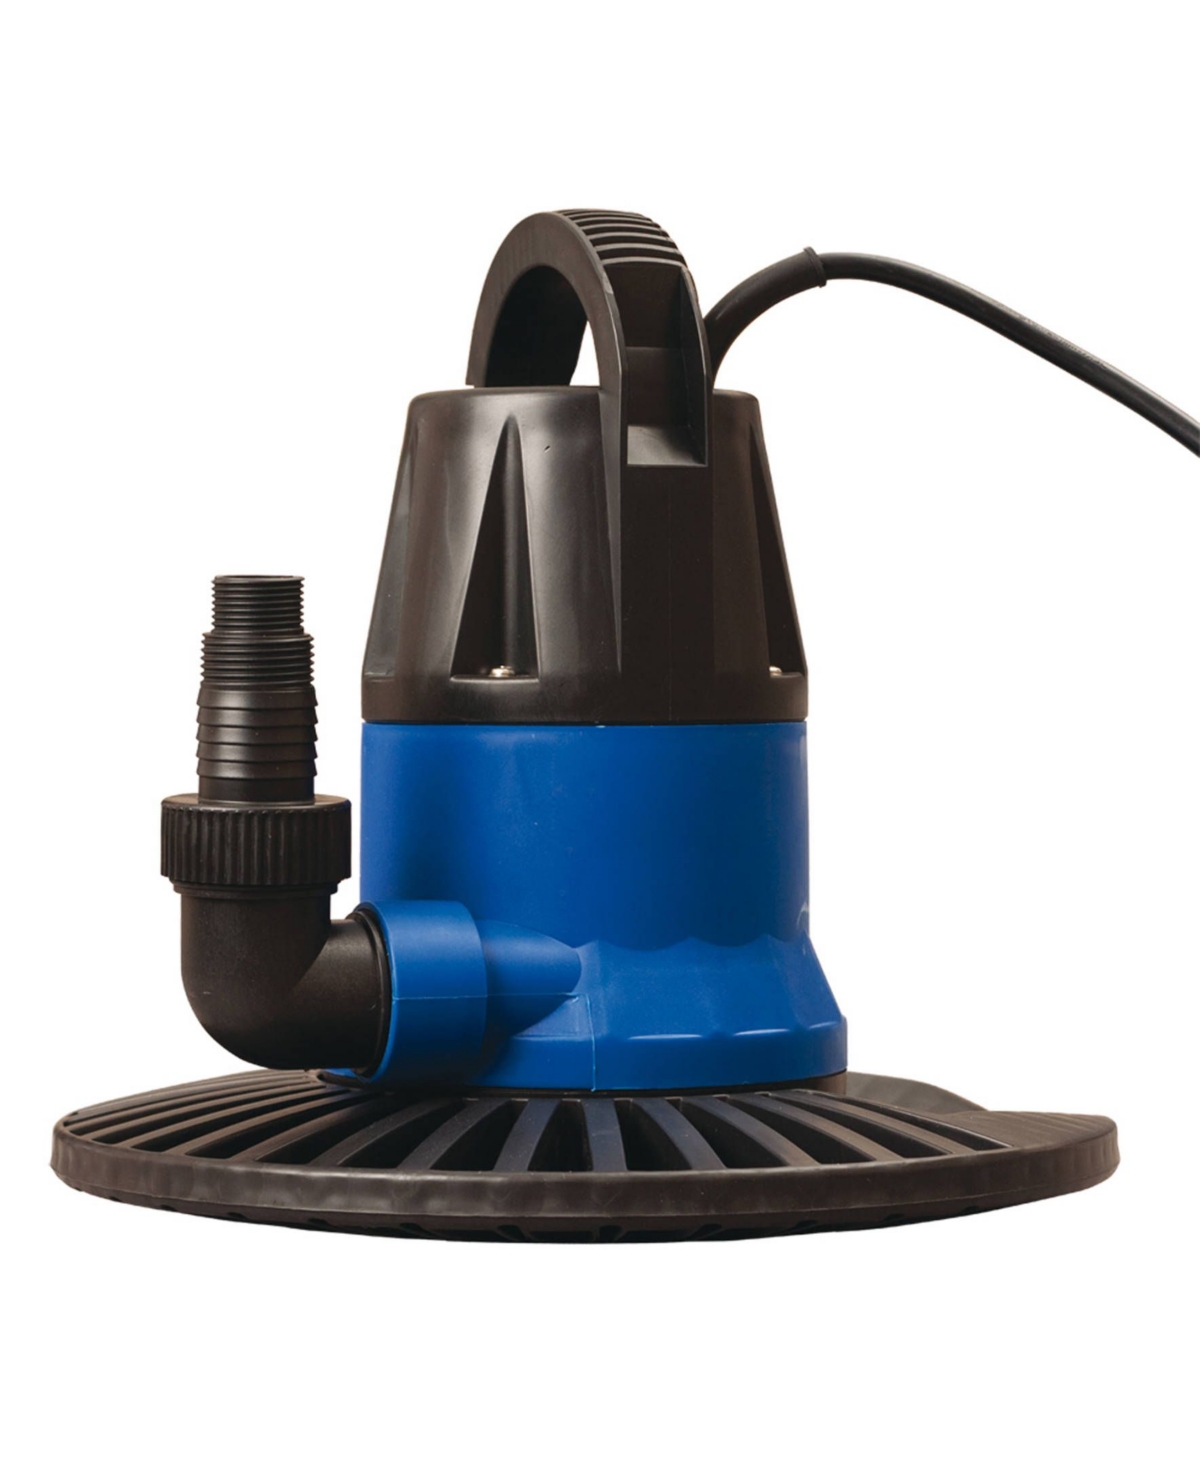 Sports Super Dredger 2450 Gph In-Ground Winter Cover Pump with Base - Royal Blue